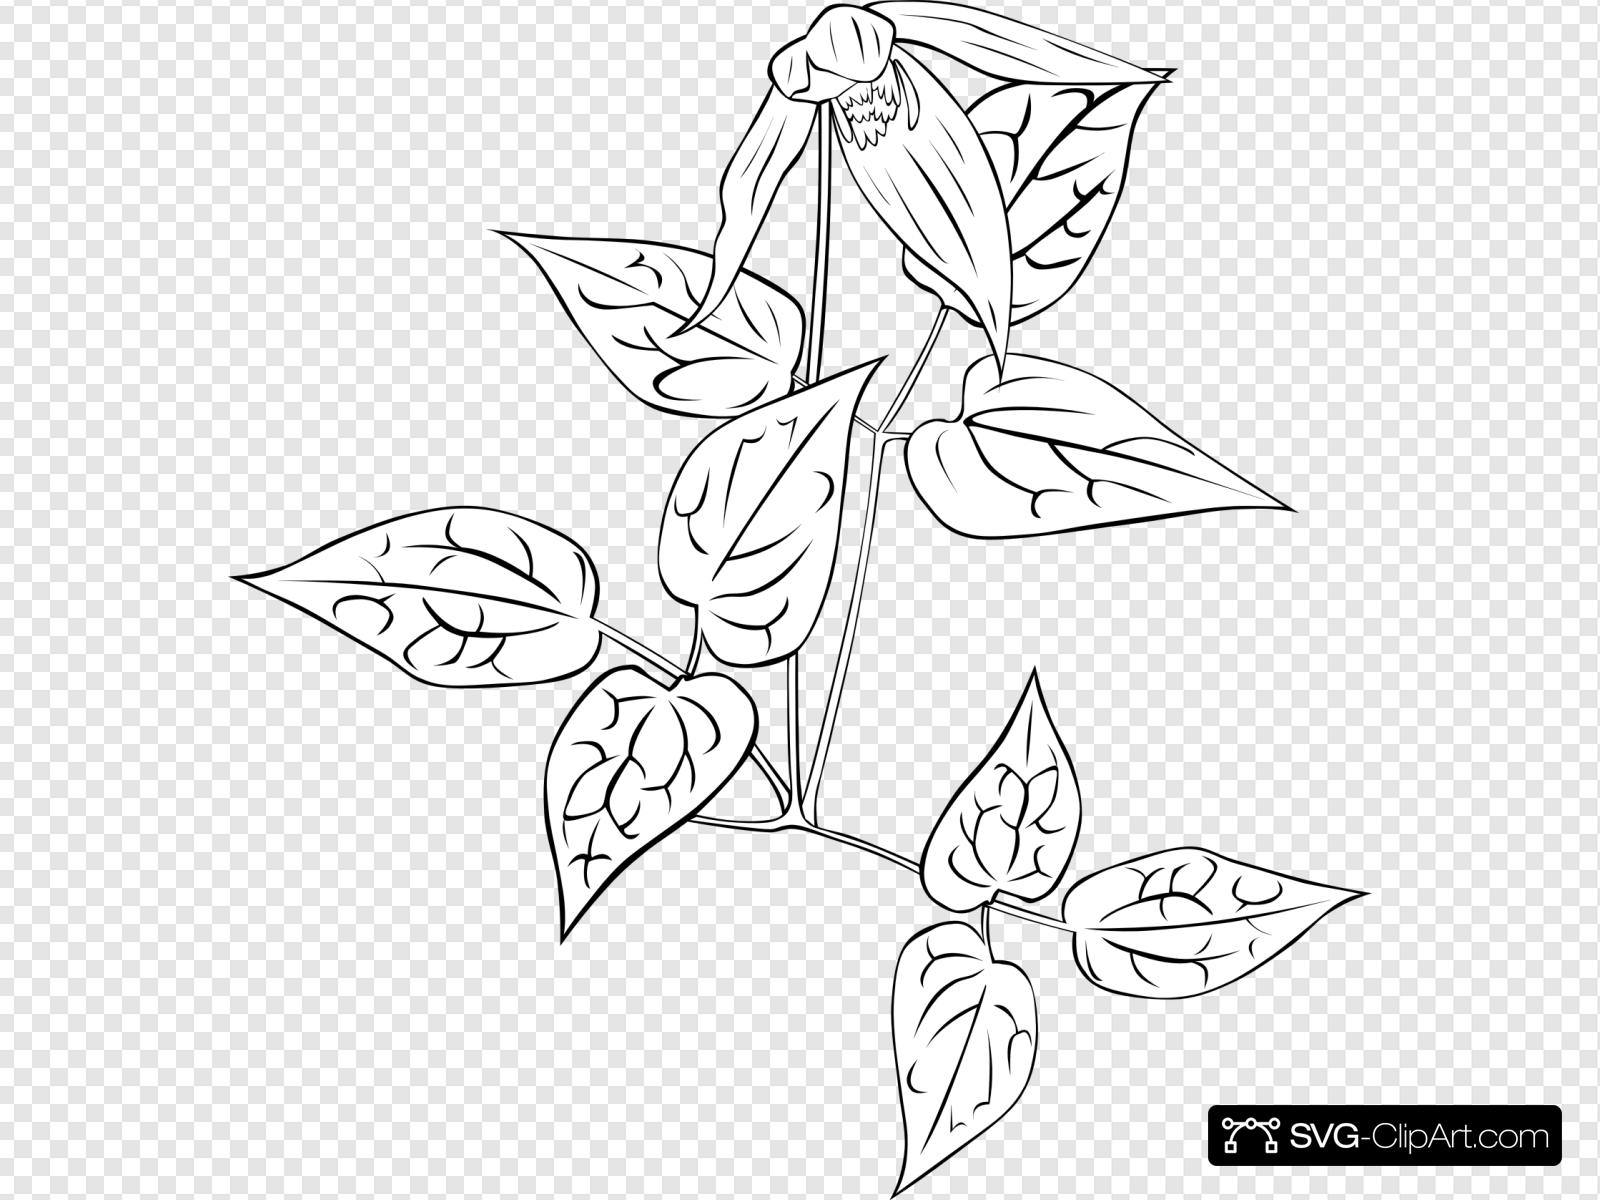 Western Blue Virginsbower Coloring Page Clip art, Icon and.